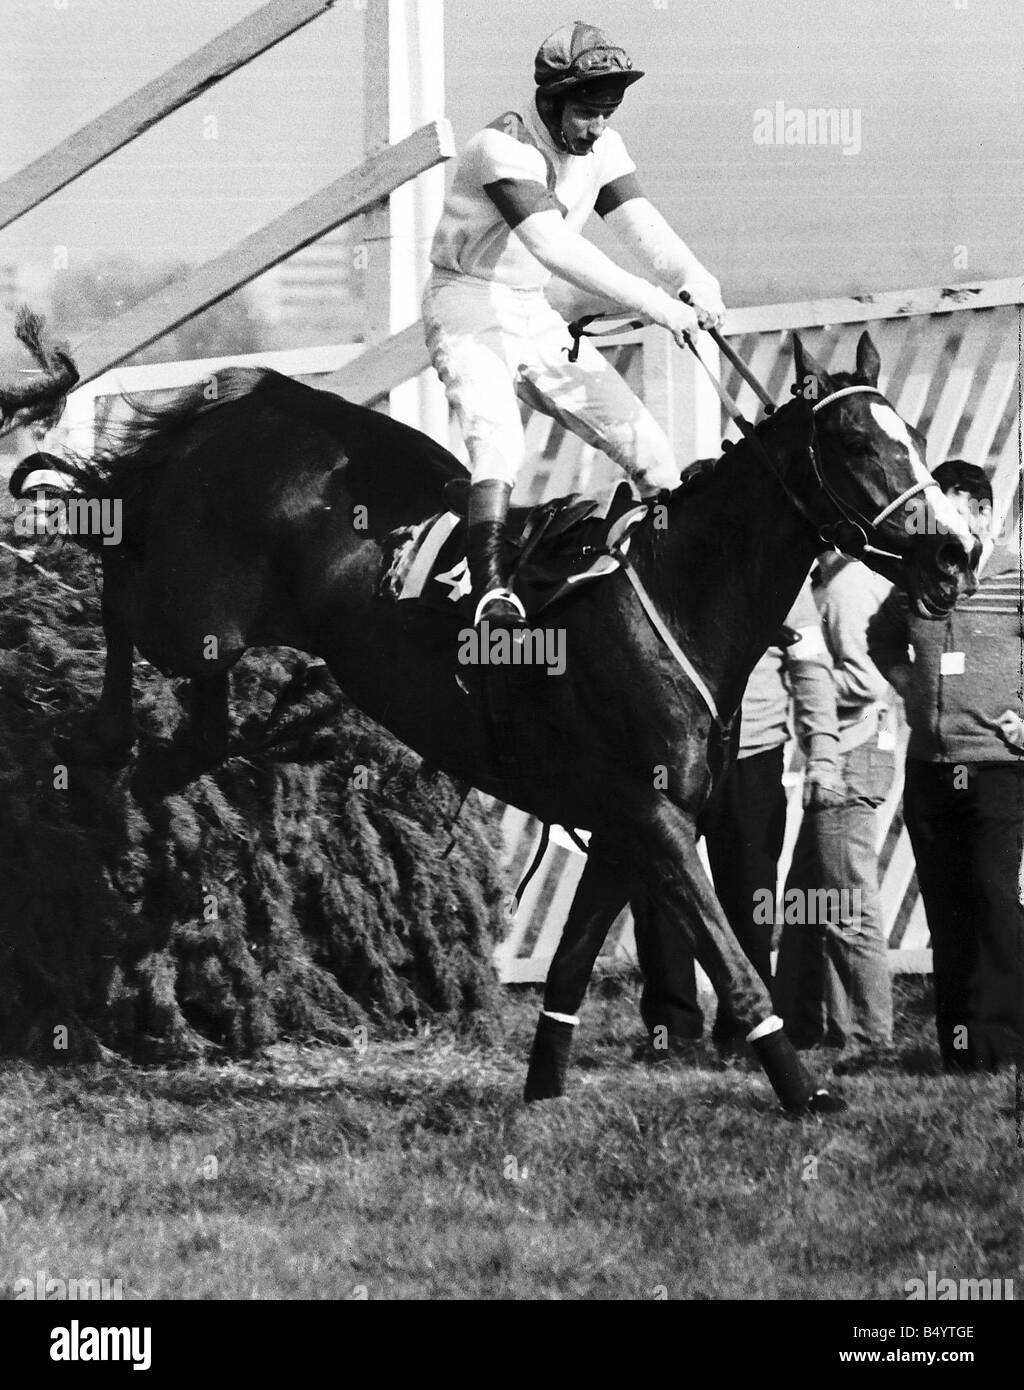 No46 Aldaniti with Bob Champion jumps the last fence to win the 1981 Grand National at Aintree 6th April 1981 Owners Nick Embiricos Althea Gifford Trainer Josh Gifford Jockey Bob Champion Record jumps 8 wins from 26 starts Career highlights Won 1981 Whitbread Trial Chase Grand National 2nd 1979 Scottish Grand National 3rd 1977 Hennessy Cognac Gold Cup 1979 Cheltenham Gold Cup Mirrorpix LAFRSSAPR05 0405 Stock Photo